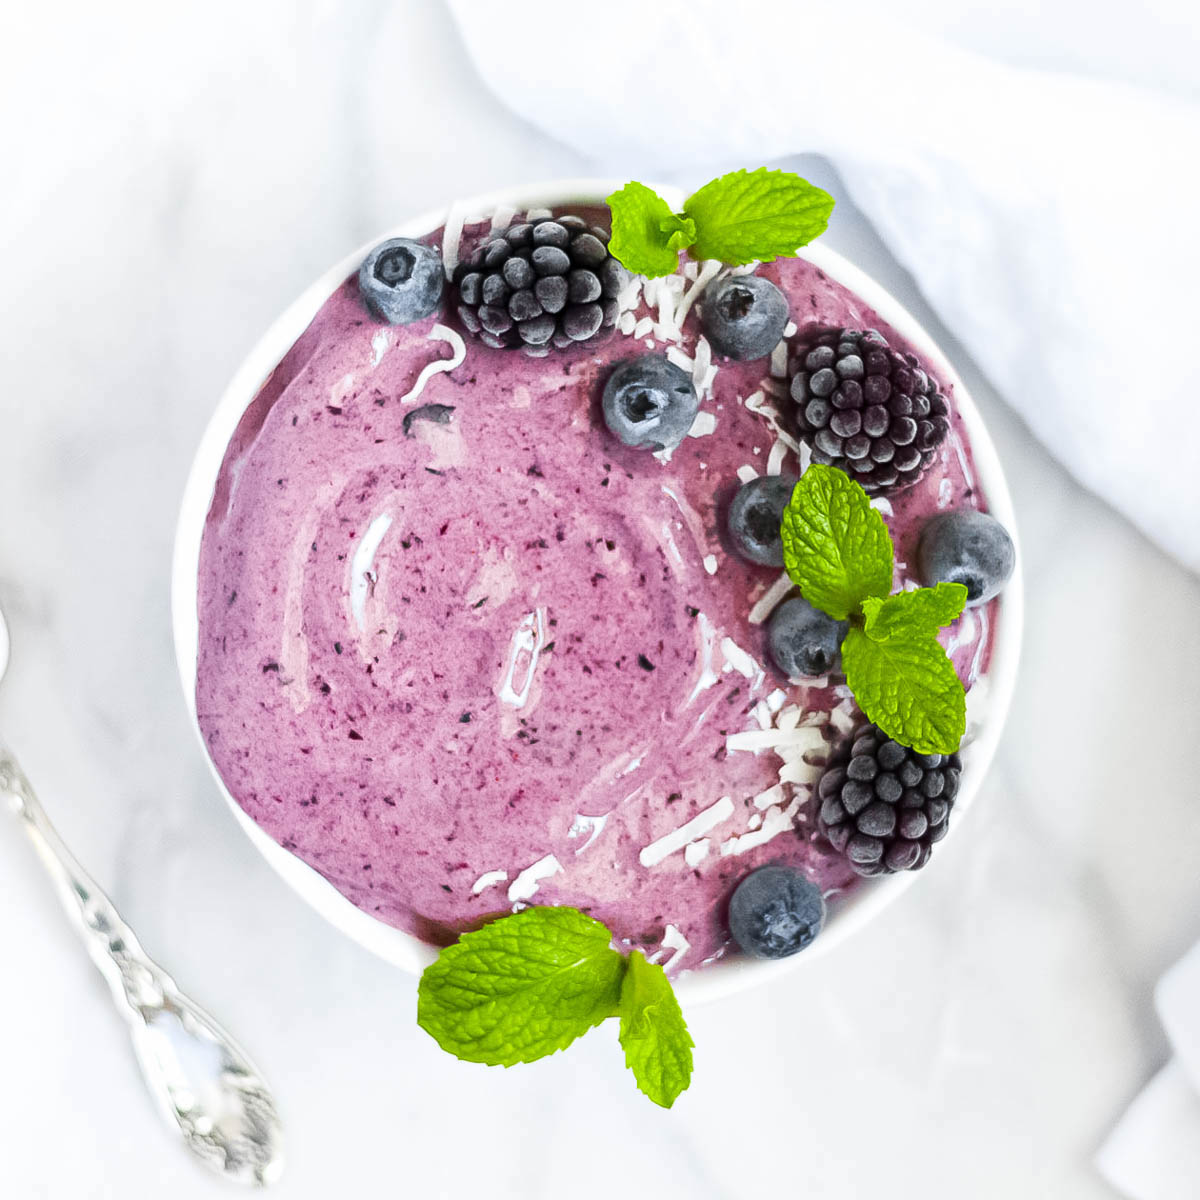 Picture of a purple smoothie in a white bowl, garnished with blackberries, blueberries, coconut flakes, and fresh mint.,